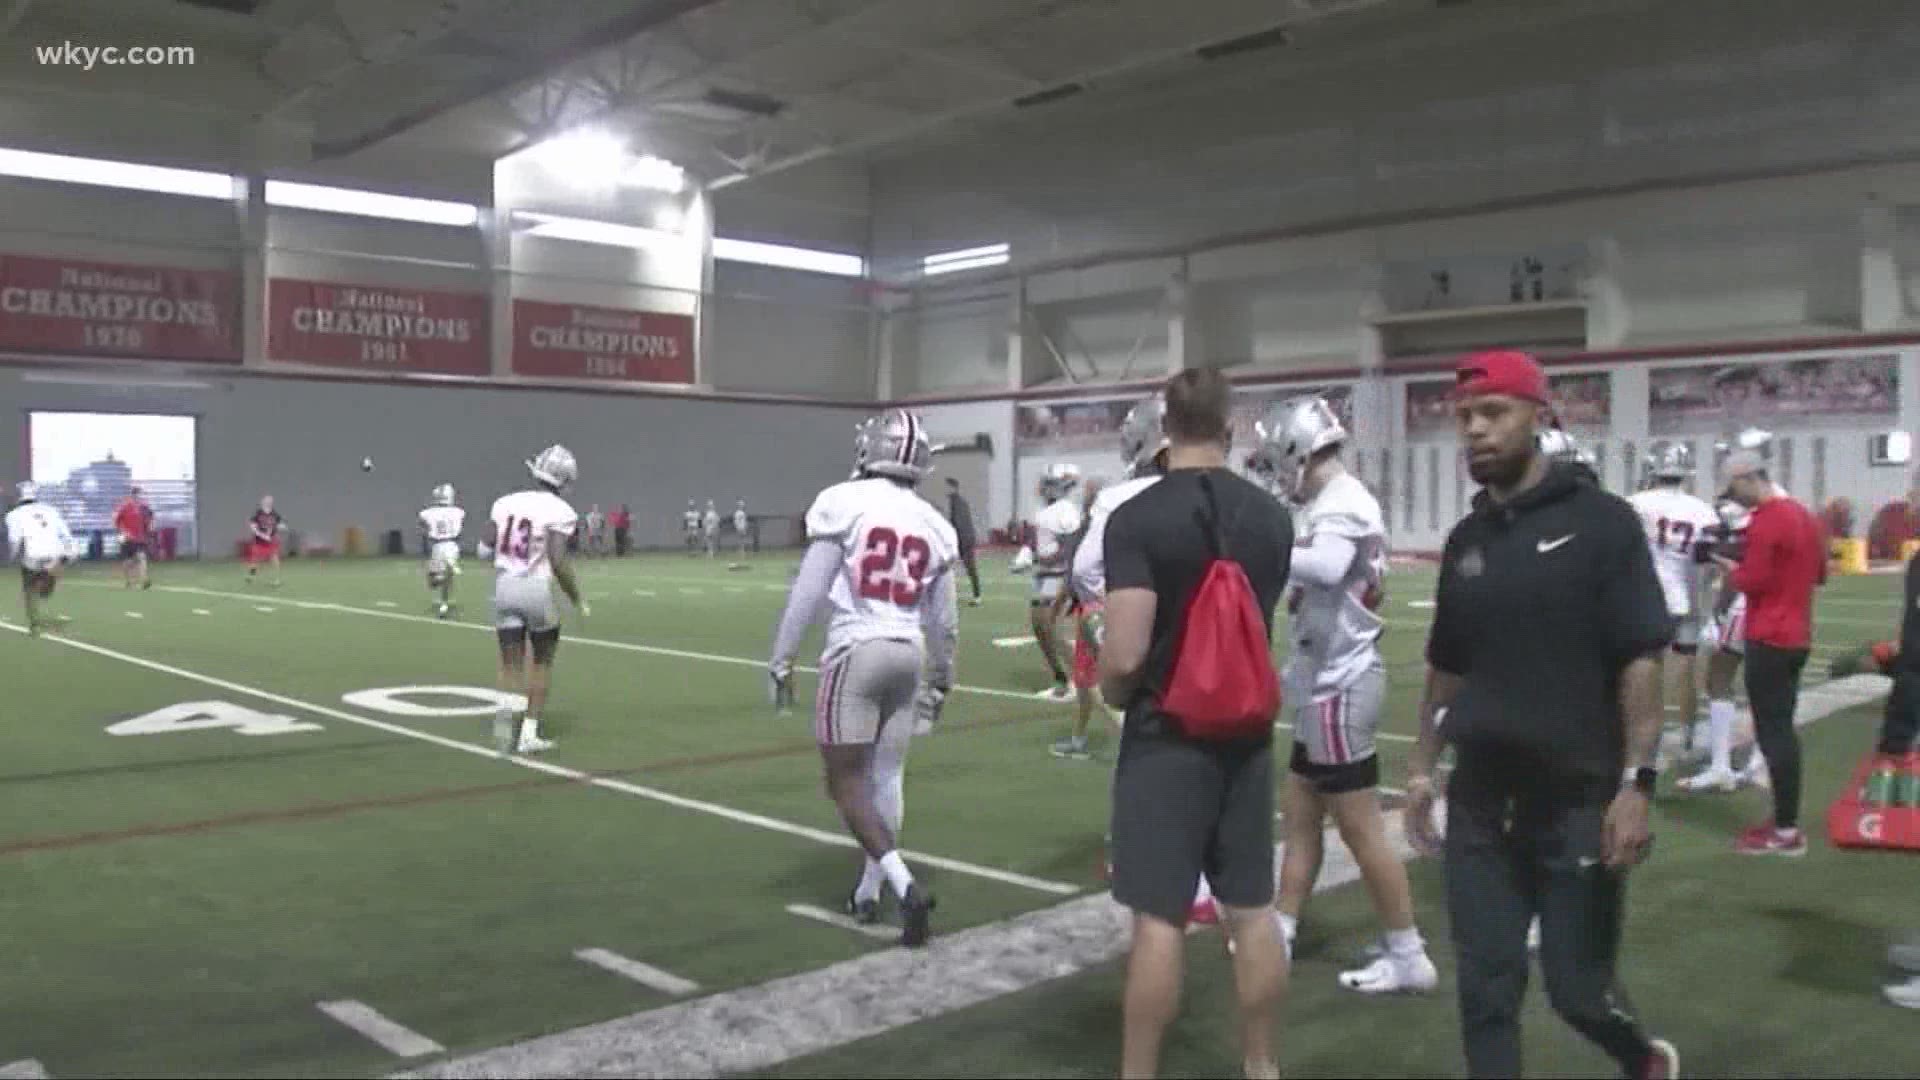 Ohio State Athletics has paused all sports workouts following the results of its most recent COVID-19 testing of students. Jim Donovan has the details.